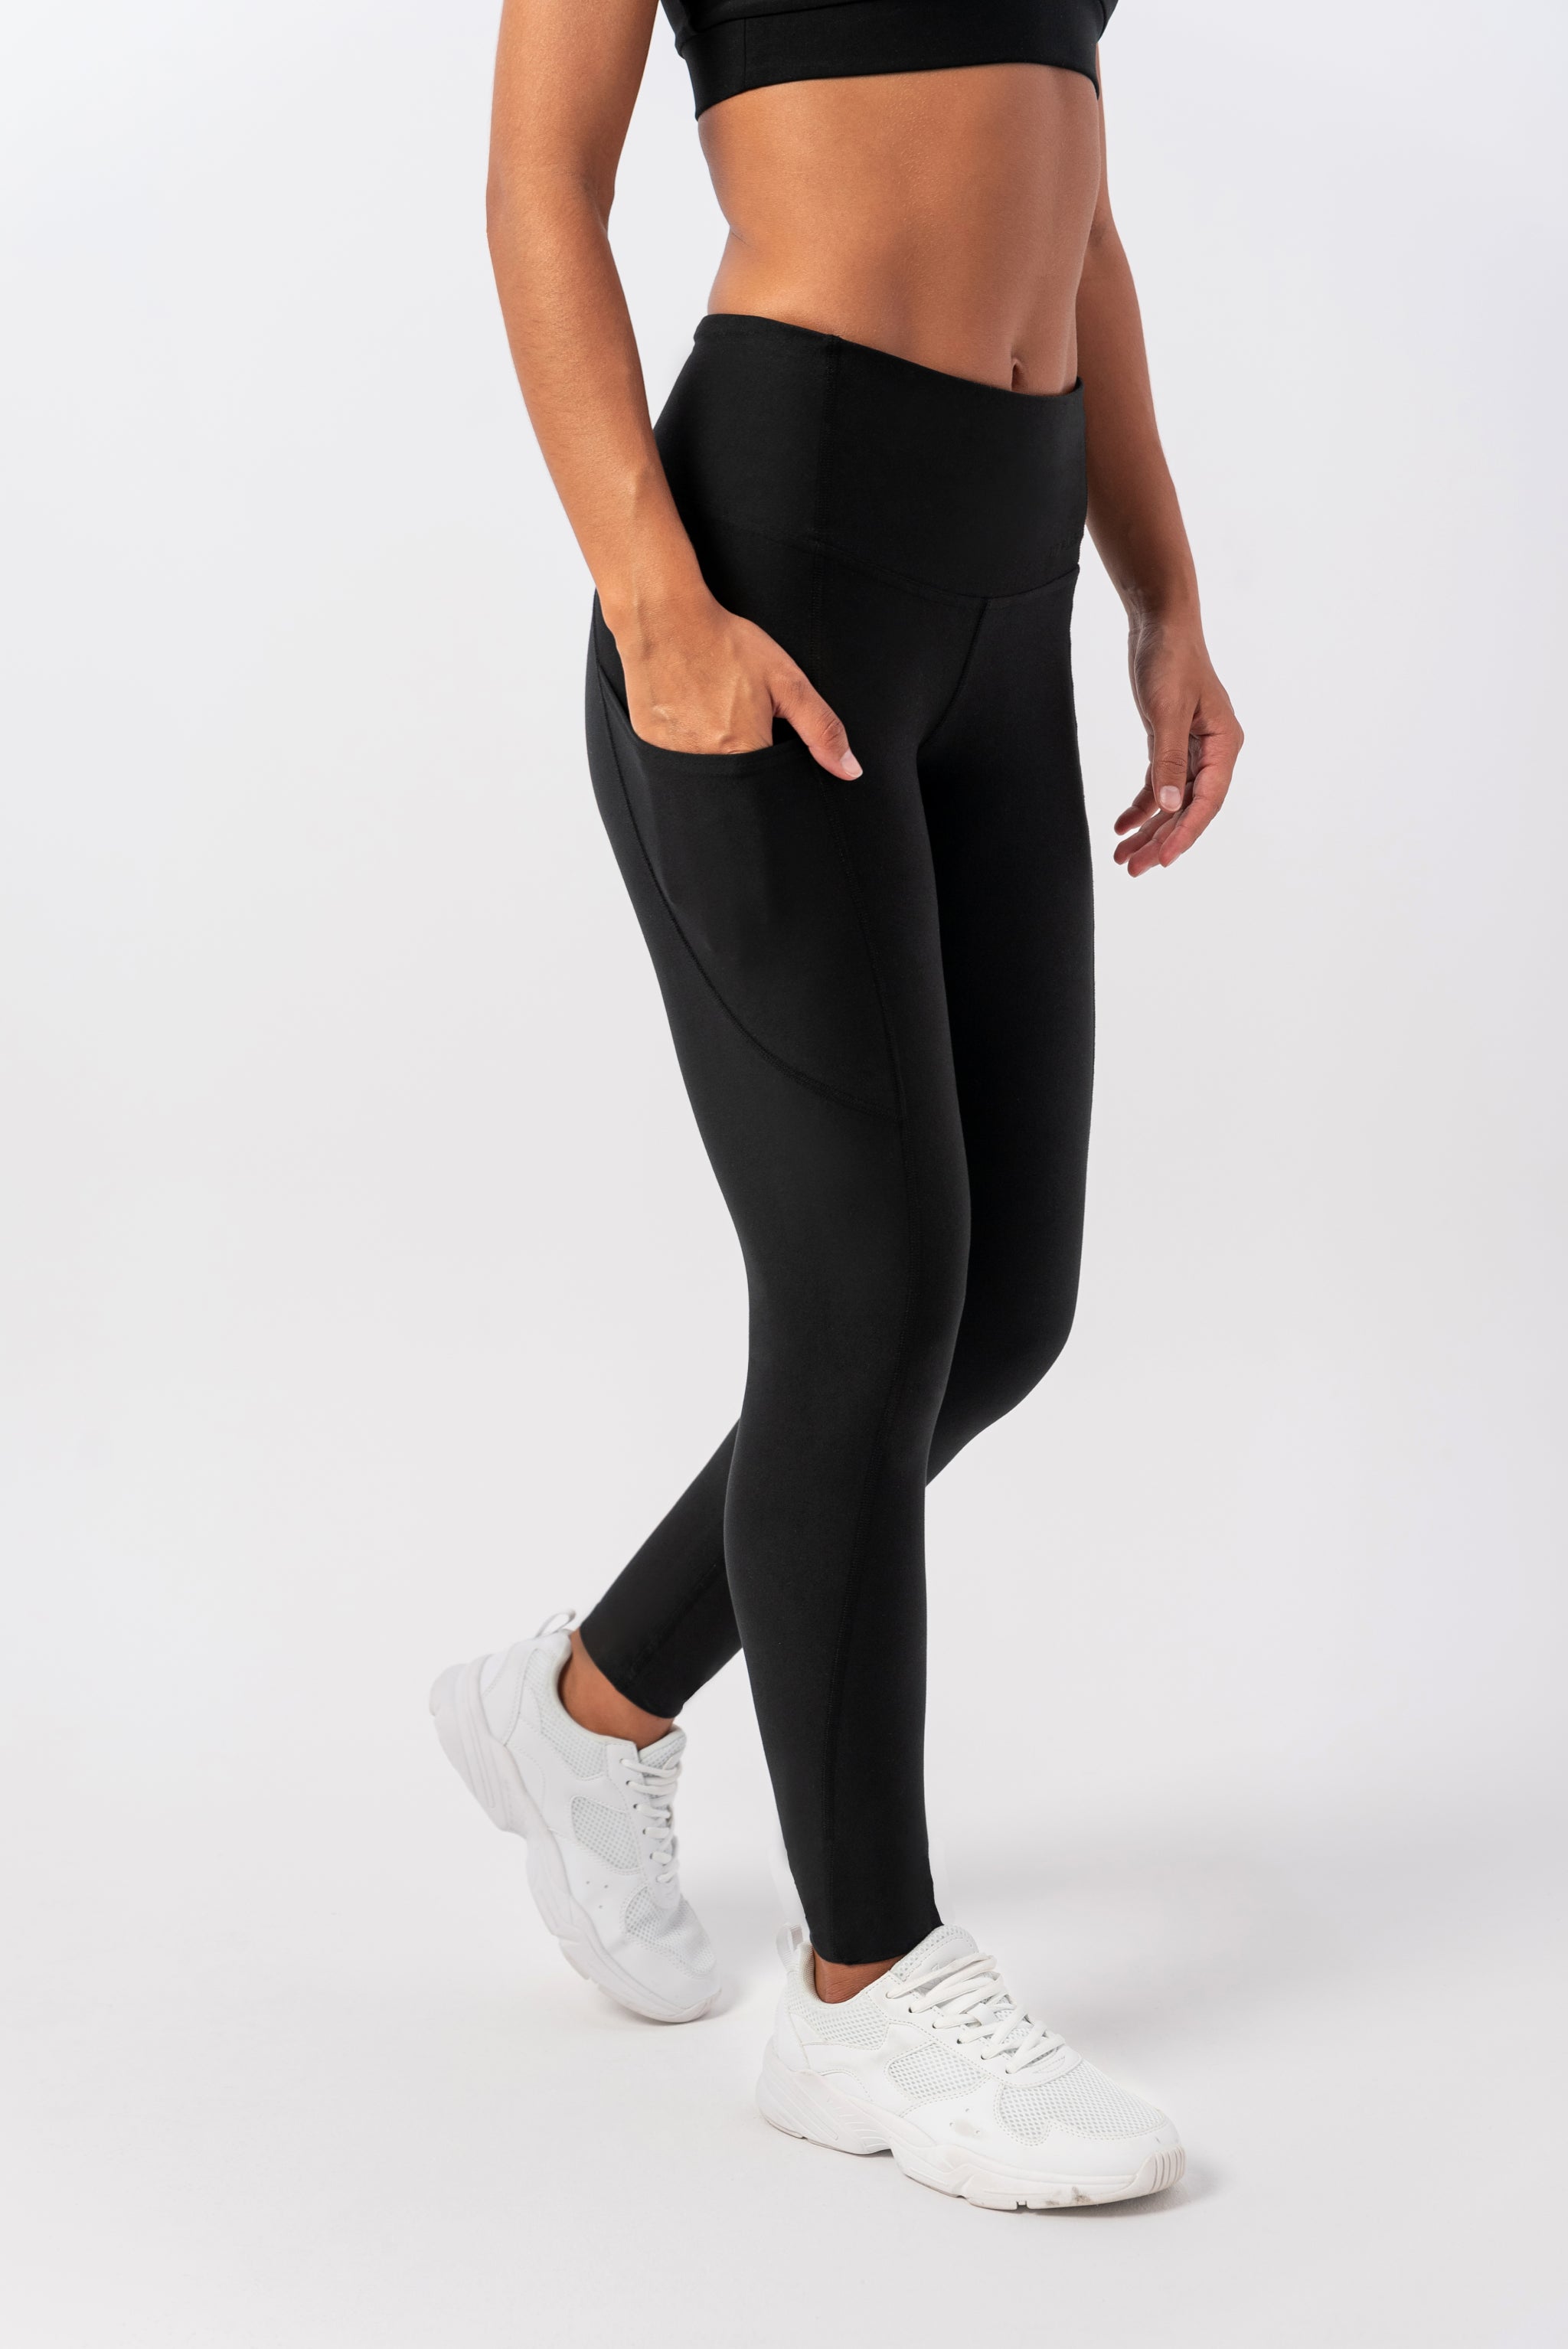 Is your fitness gear ethical? Find out with our NEW Activewear